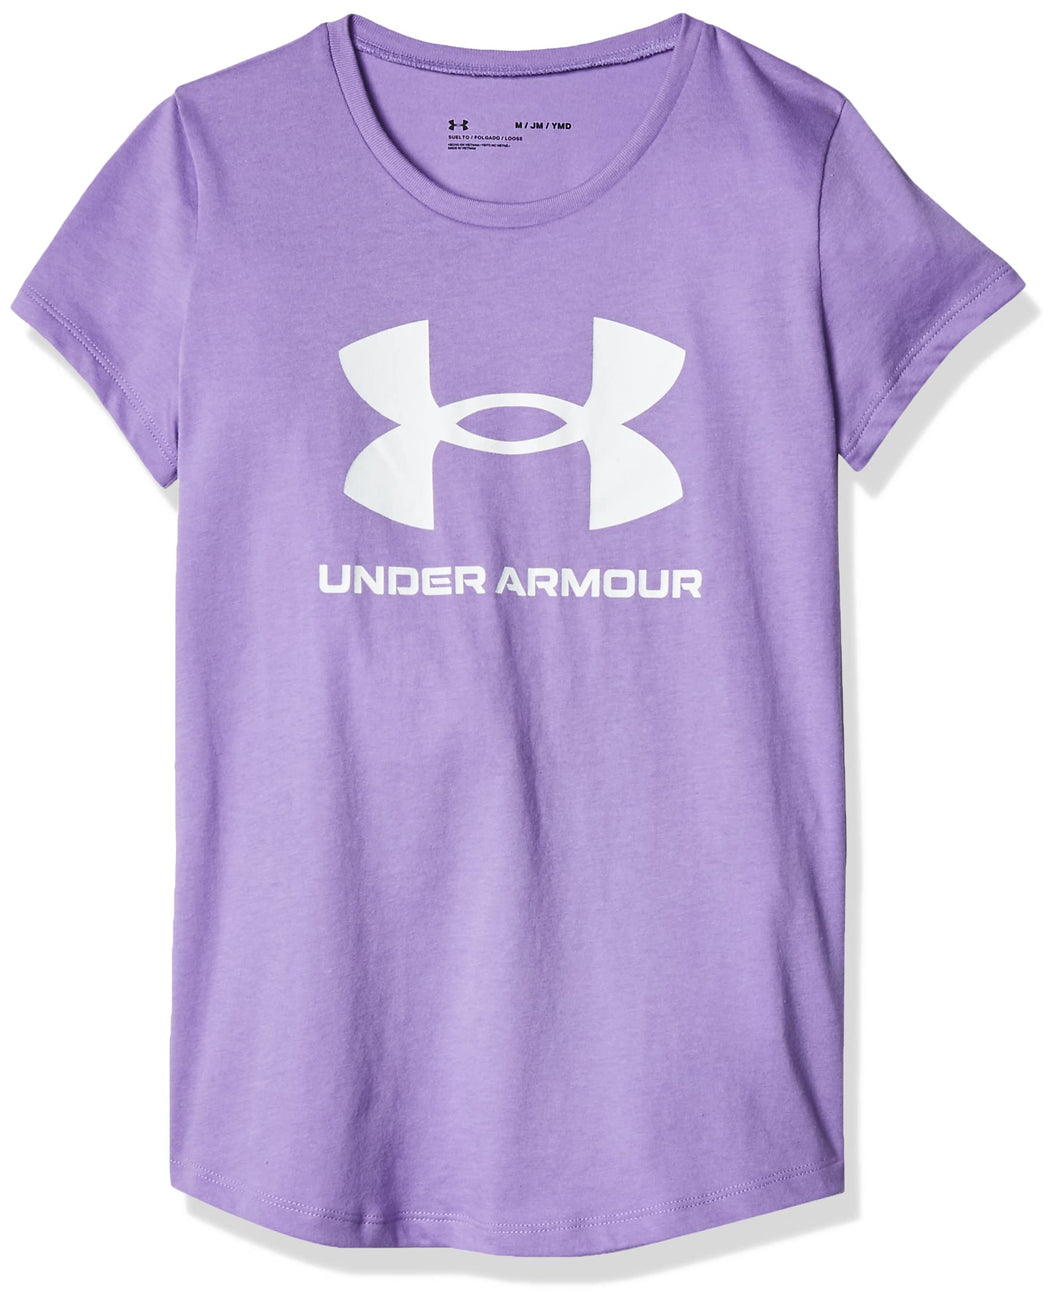 Under Armour Girls' Live Sportstyle Graphic Short-Sleeve T-Shirt , Vivid Lilac (560)/White , Youth Medium